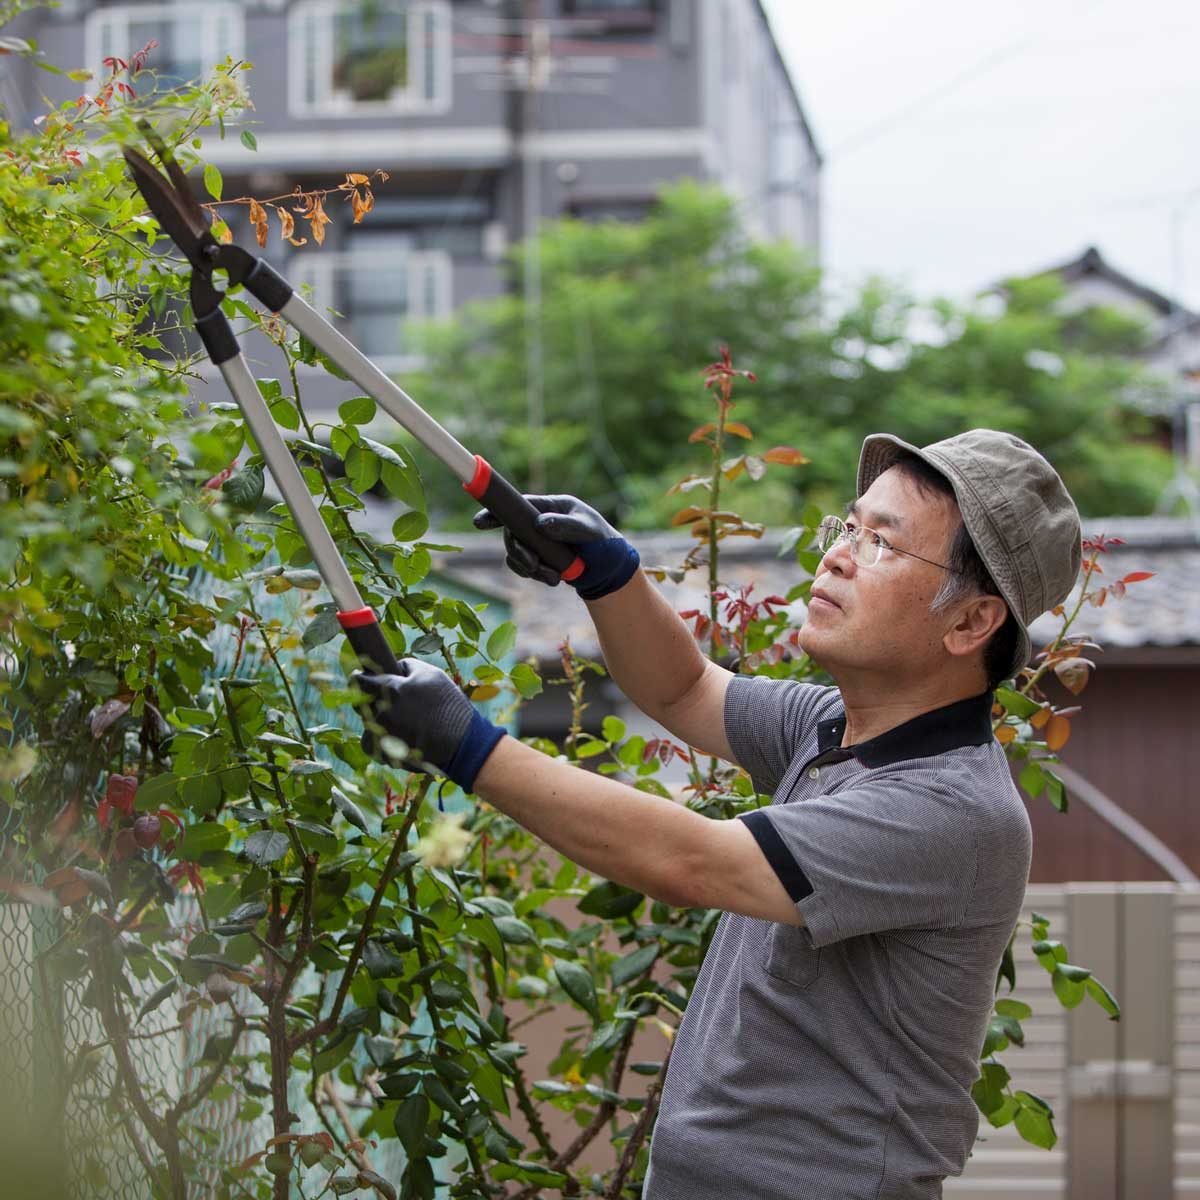 New Homeowner's Guide to Pruning Your Garden